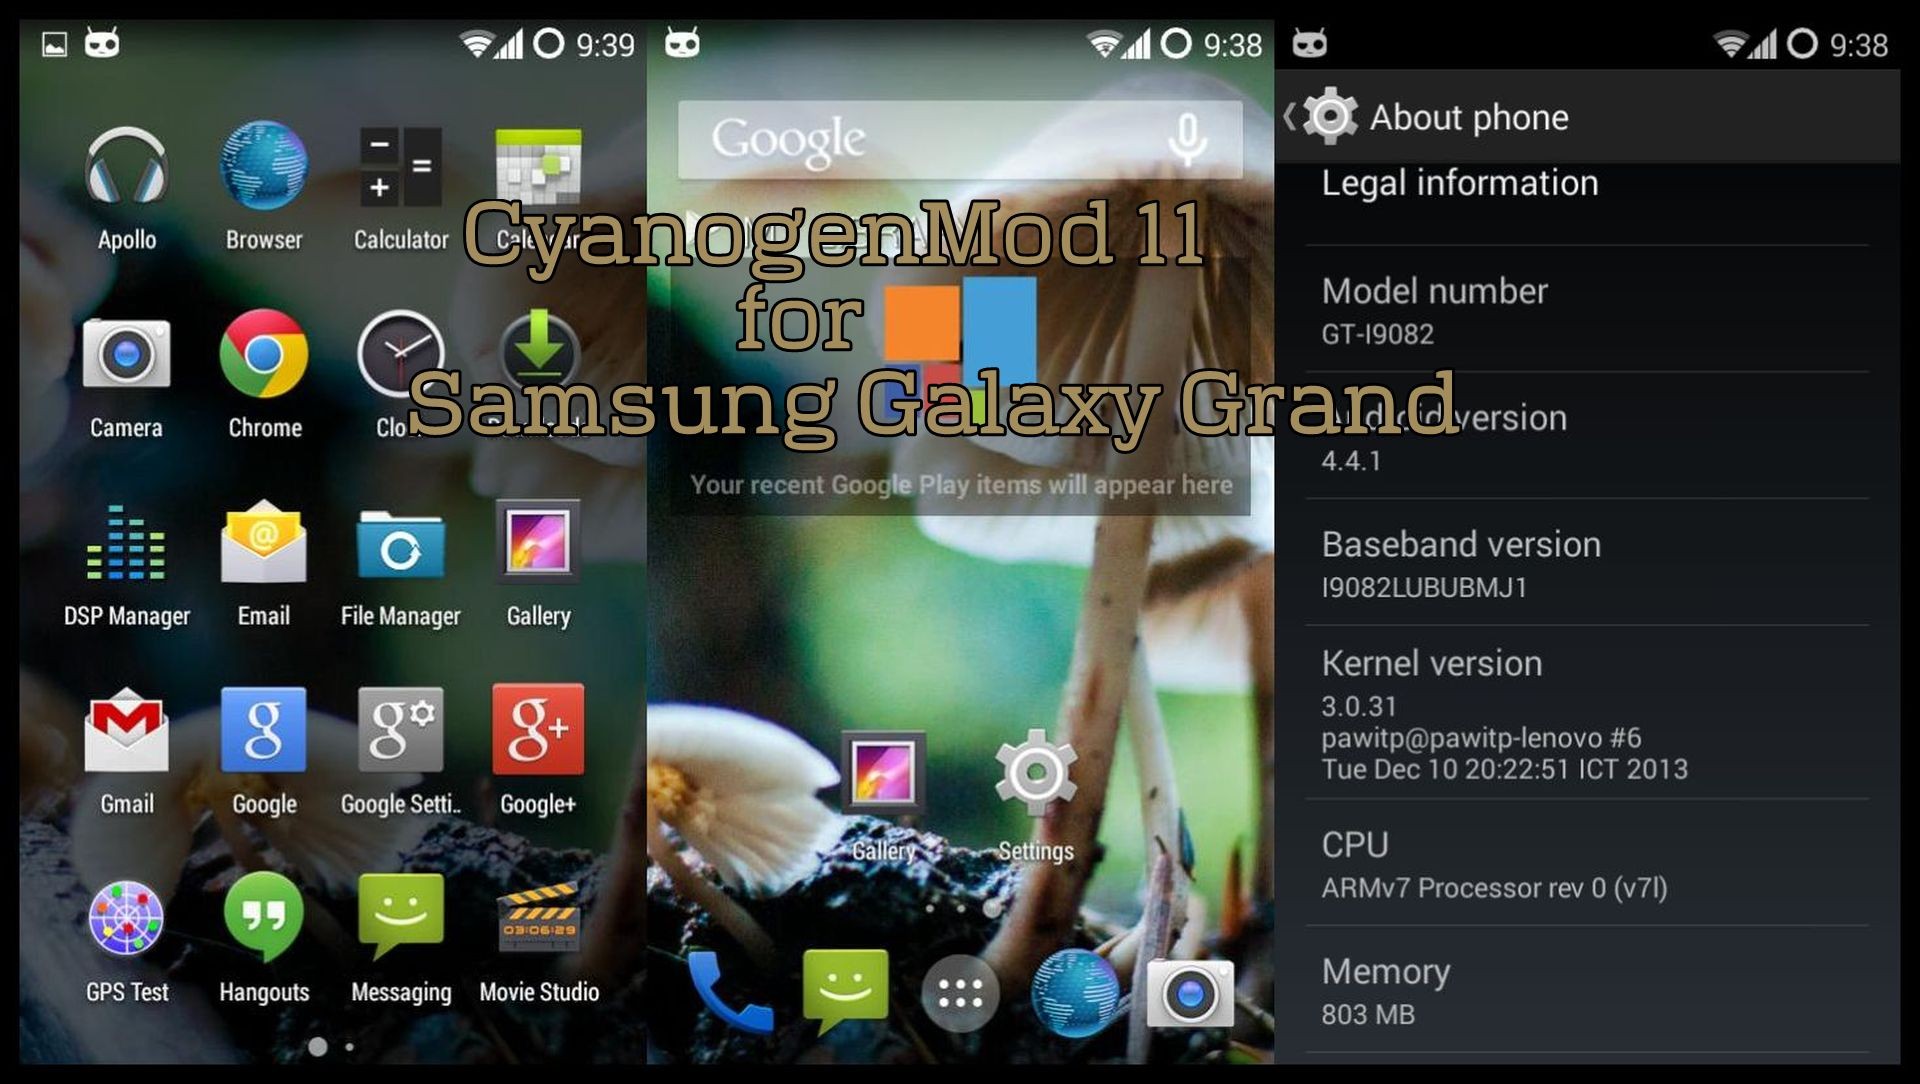 [How To] Update Samsung Galaxy Grand Duos to Android 4.4 KitKat with